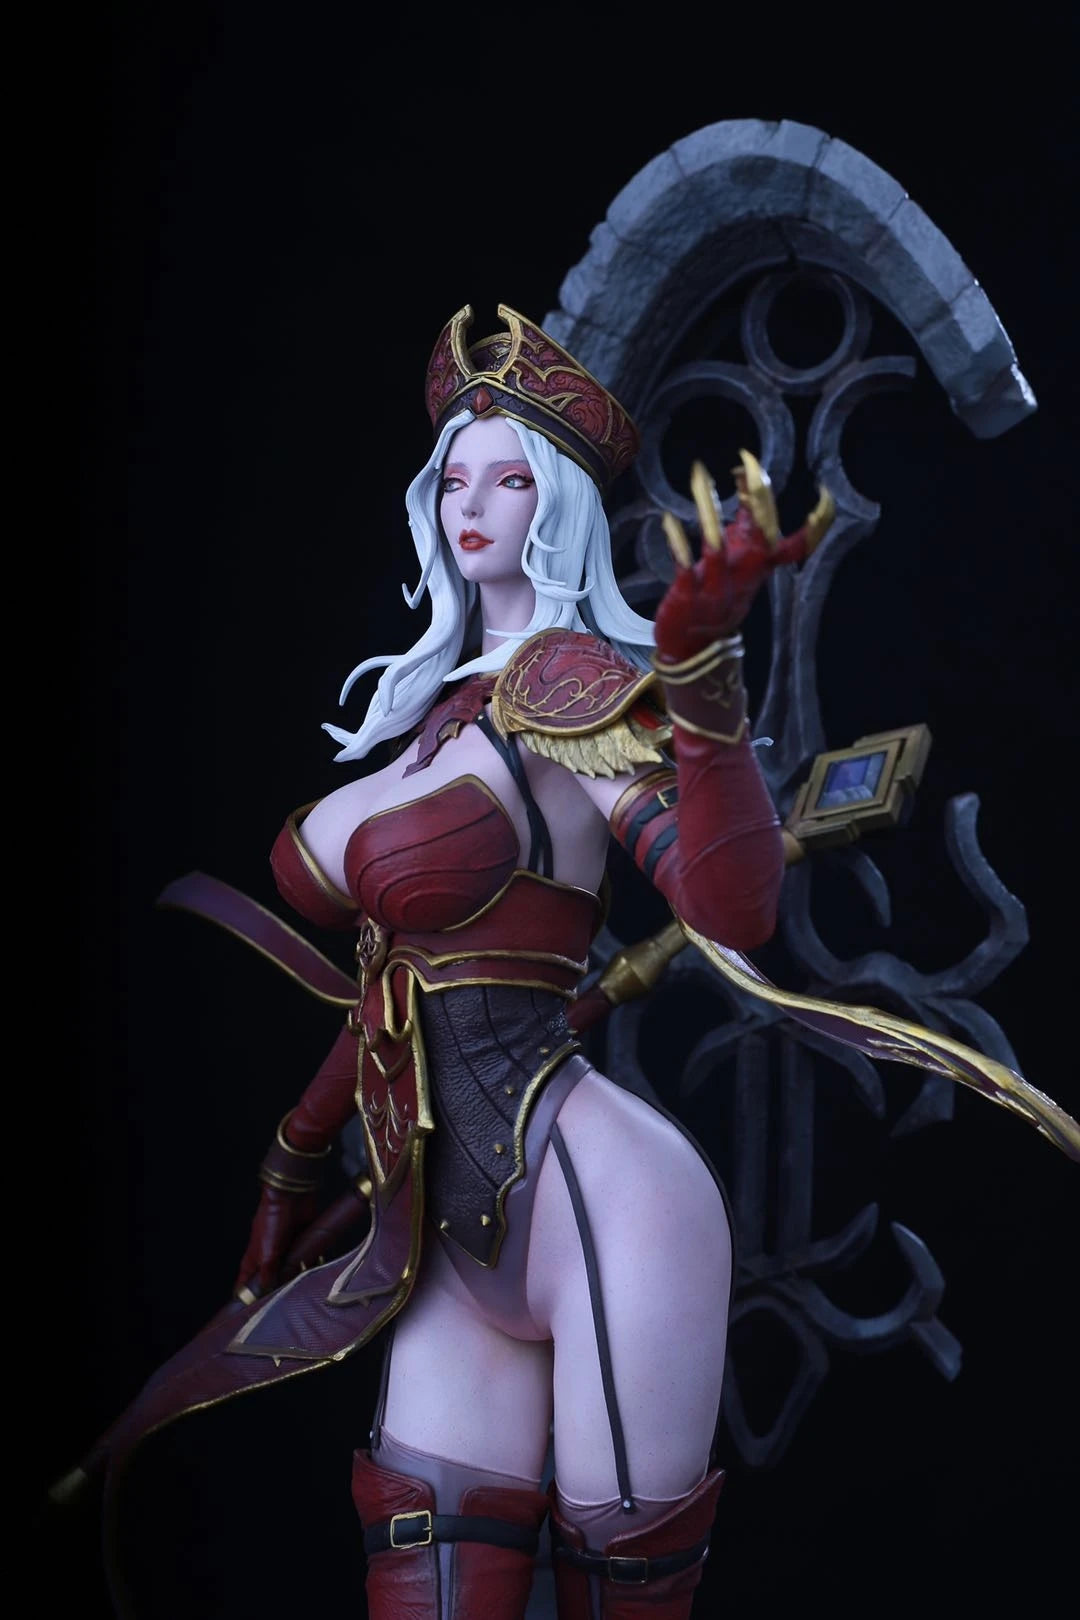 1/4 65Cm Glgk World of Warcraft Death Knight Sally Whitemane Game Action Figure Sexy Girl Model Statue Garage Kit Ornament Toys